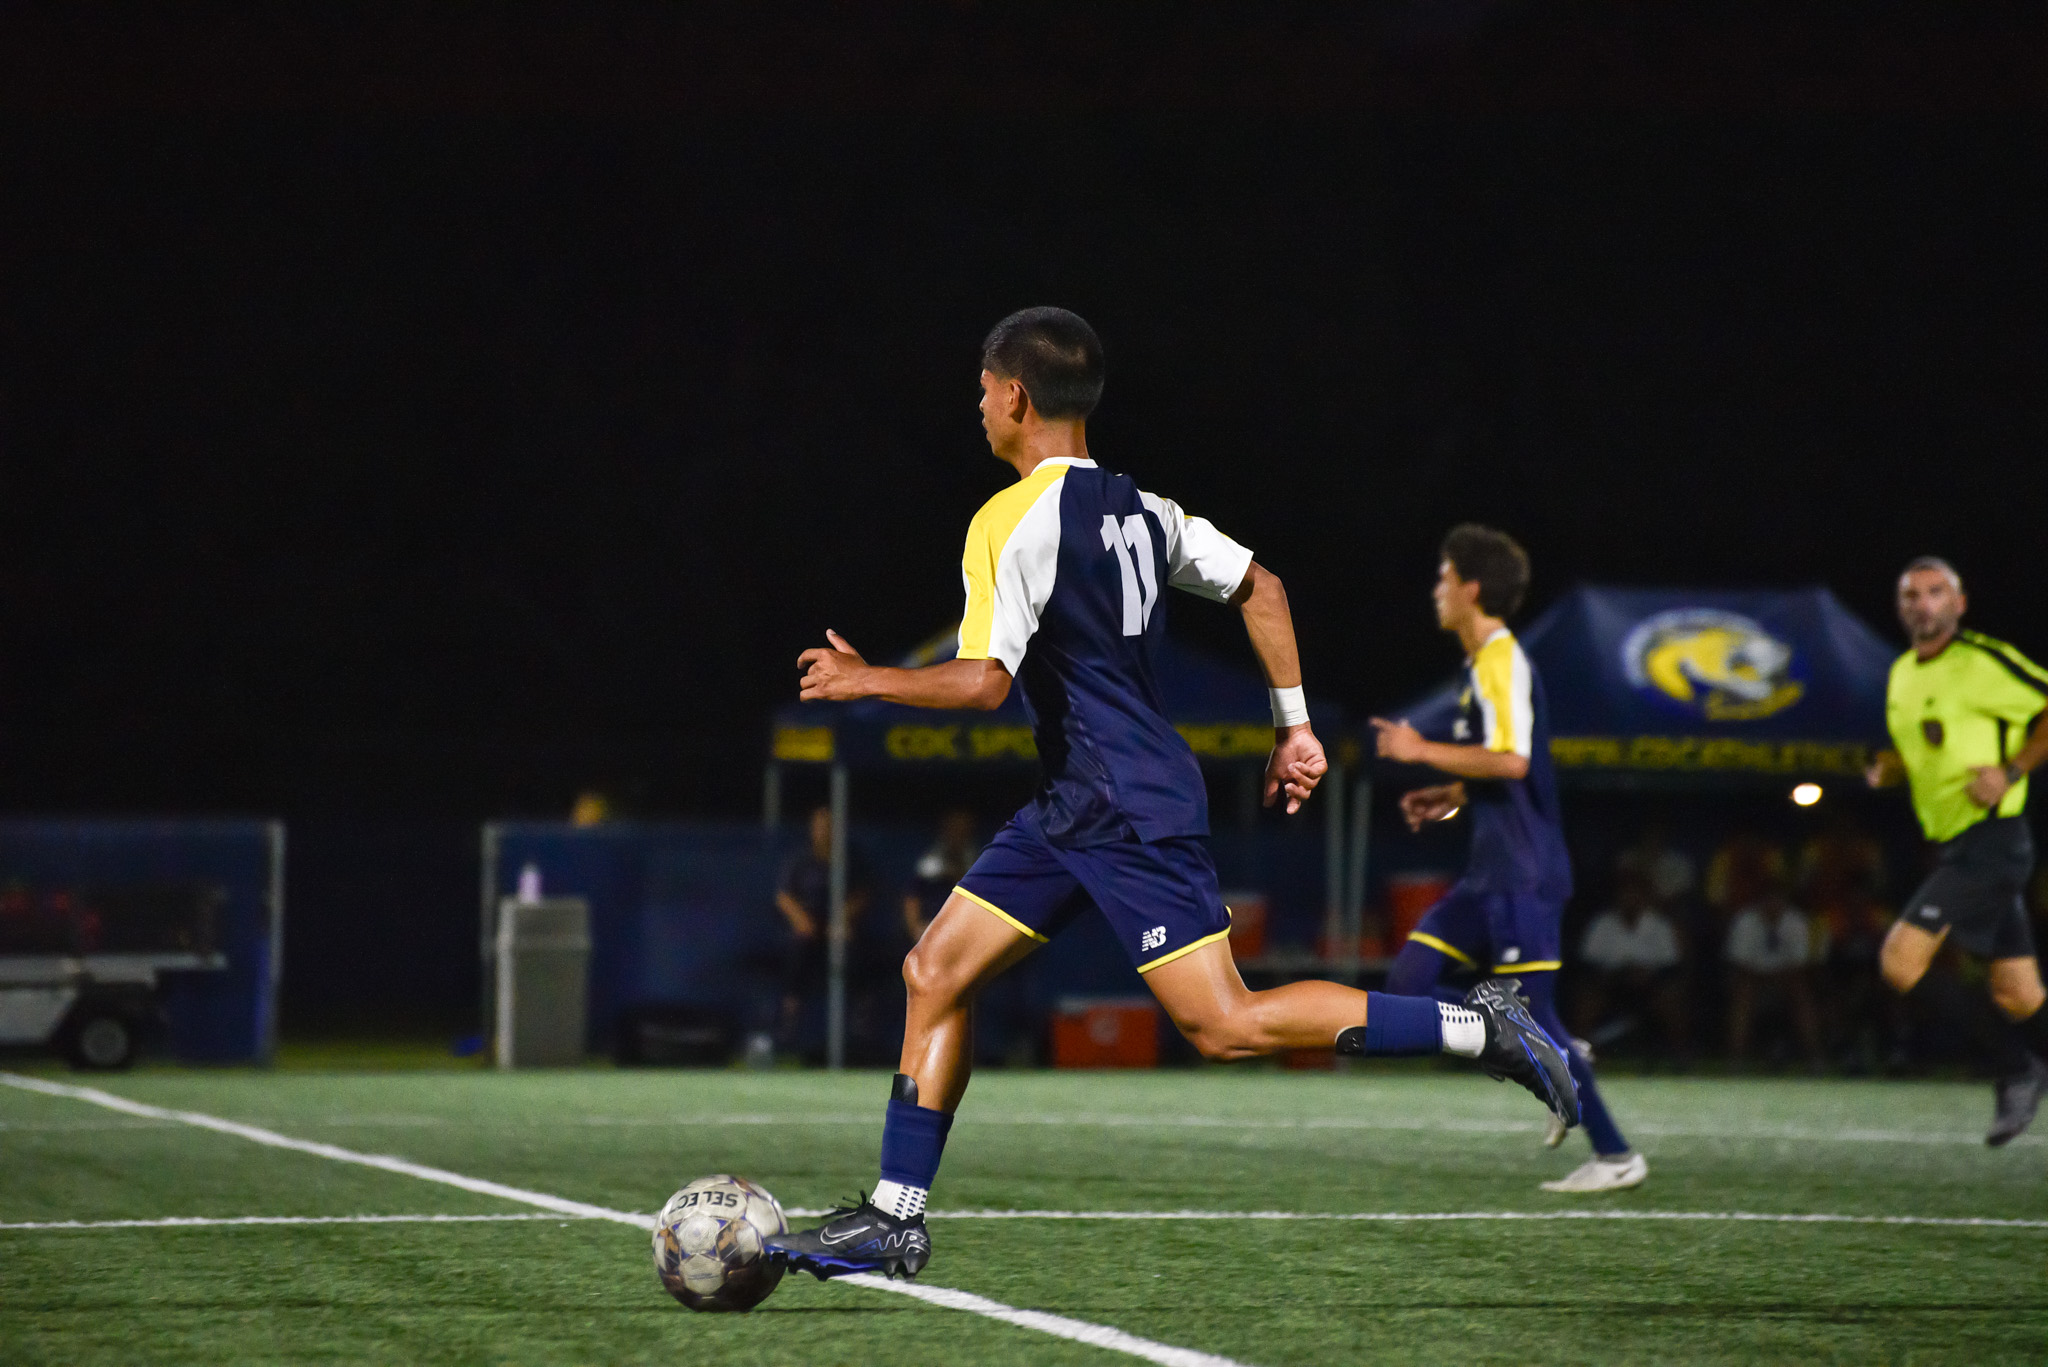 College of the Canyons men's soccer stock action image.